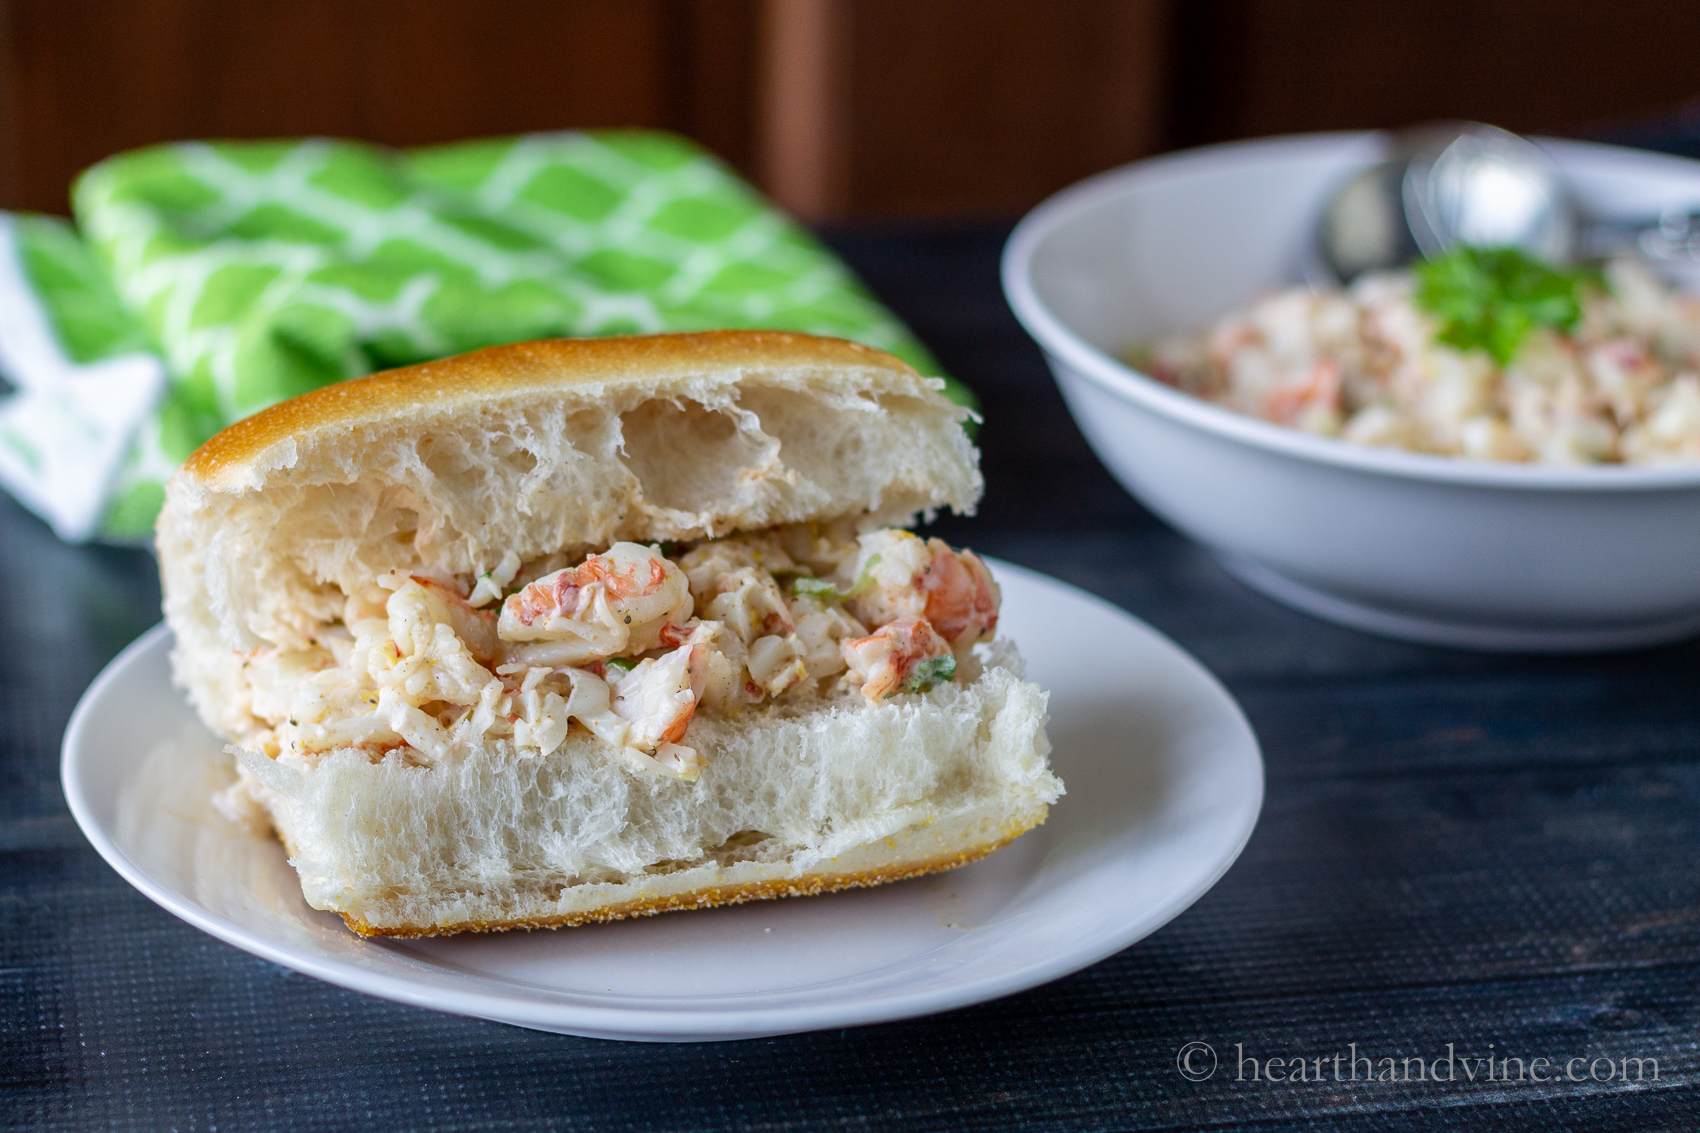 Shrimp salad on a hoagie roll next to a bowl of the same salad.